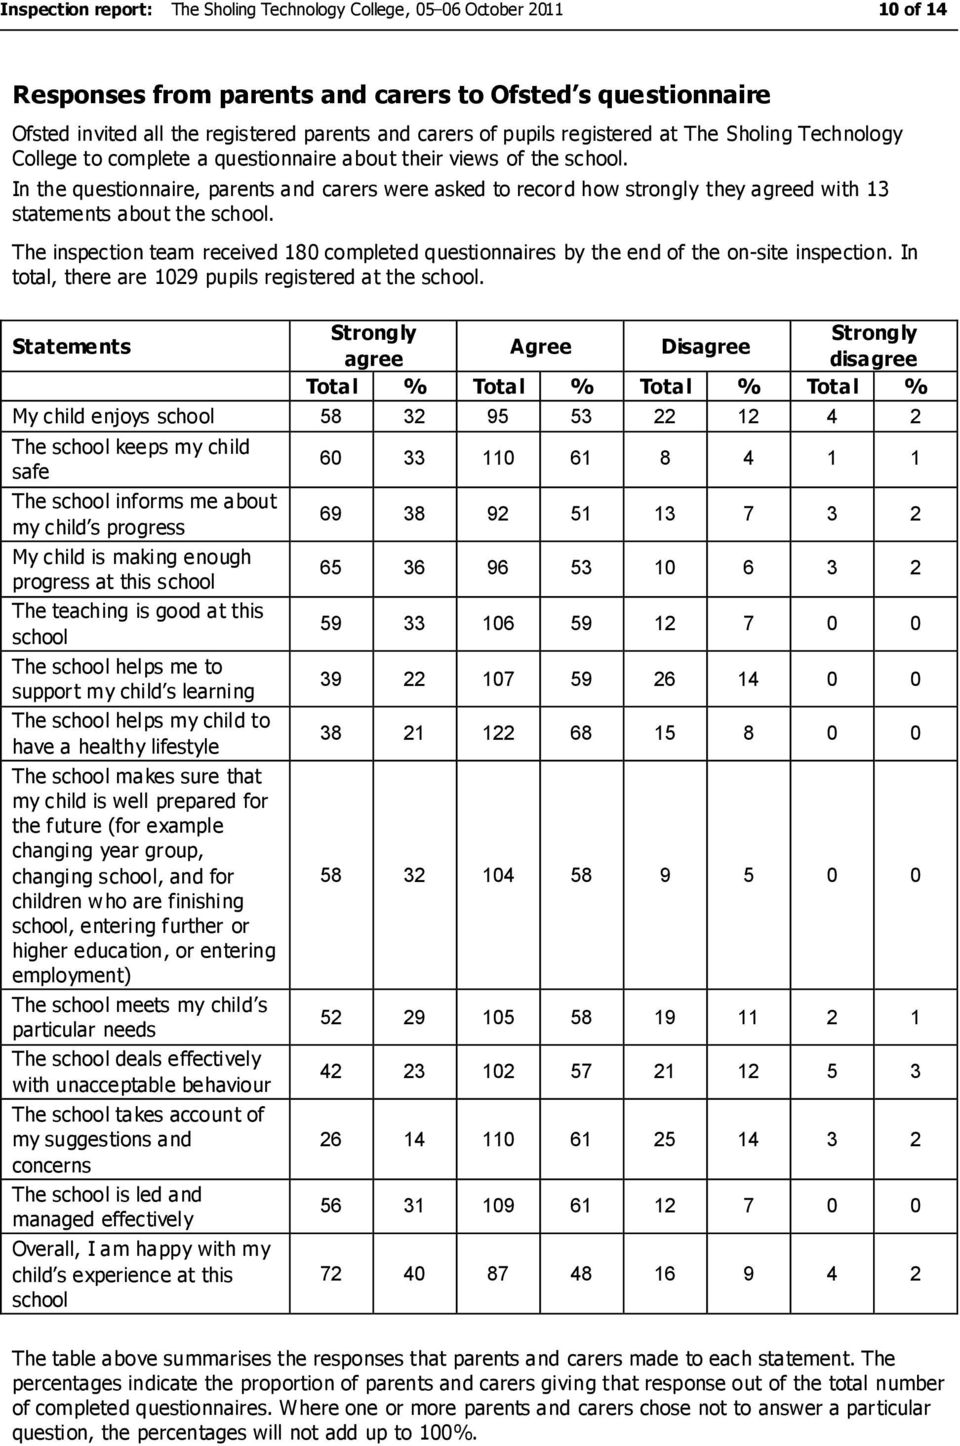 In the questionnaire, parents and carers were asked to record how strongly they agreed with 13 statements about the school.